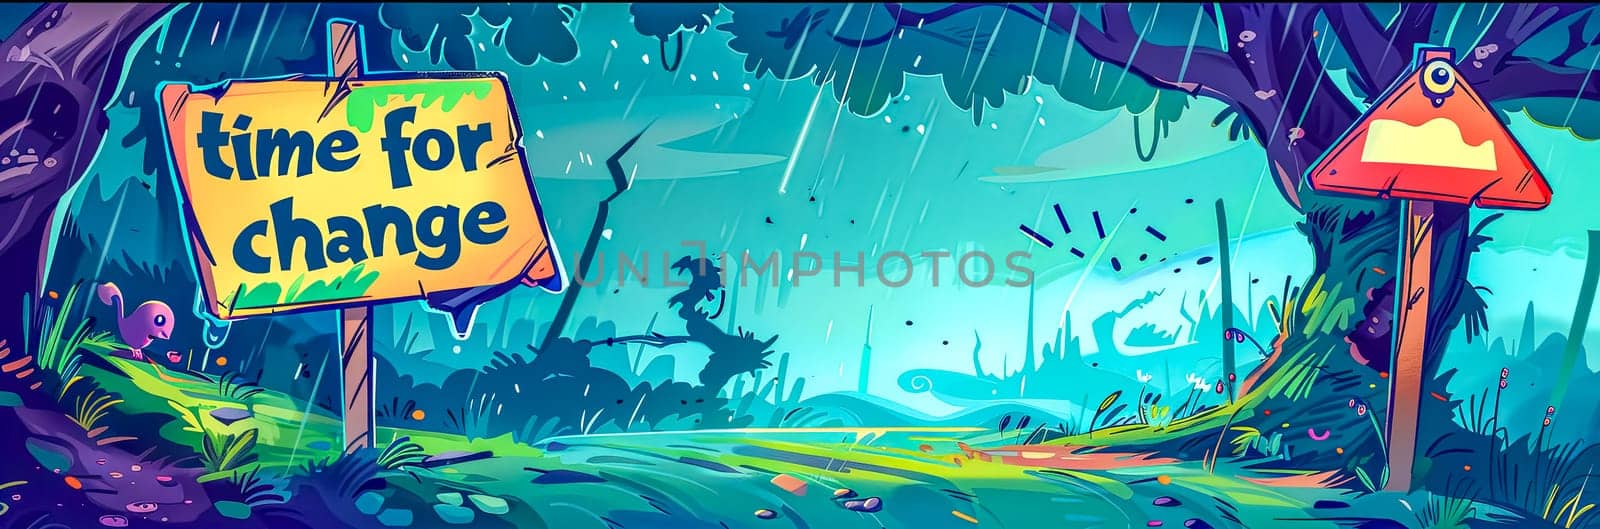 Vibrant cartoon illustration of a signpost in a lush forest scene proclaiming 'time for change'